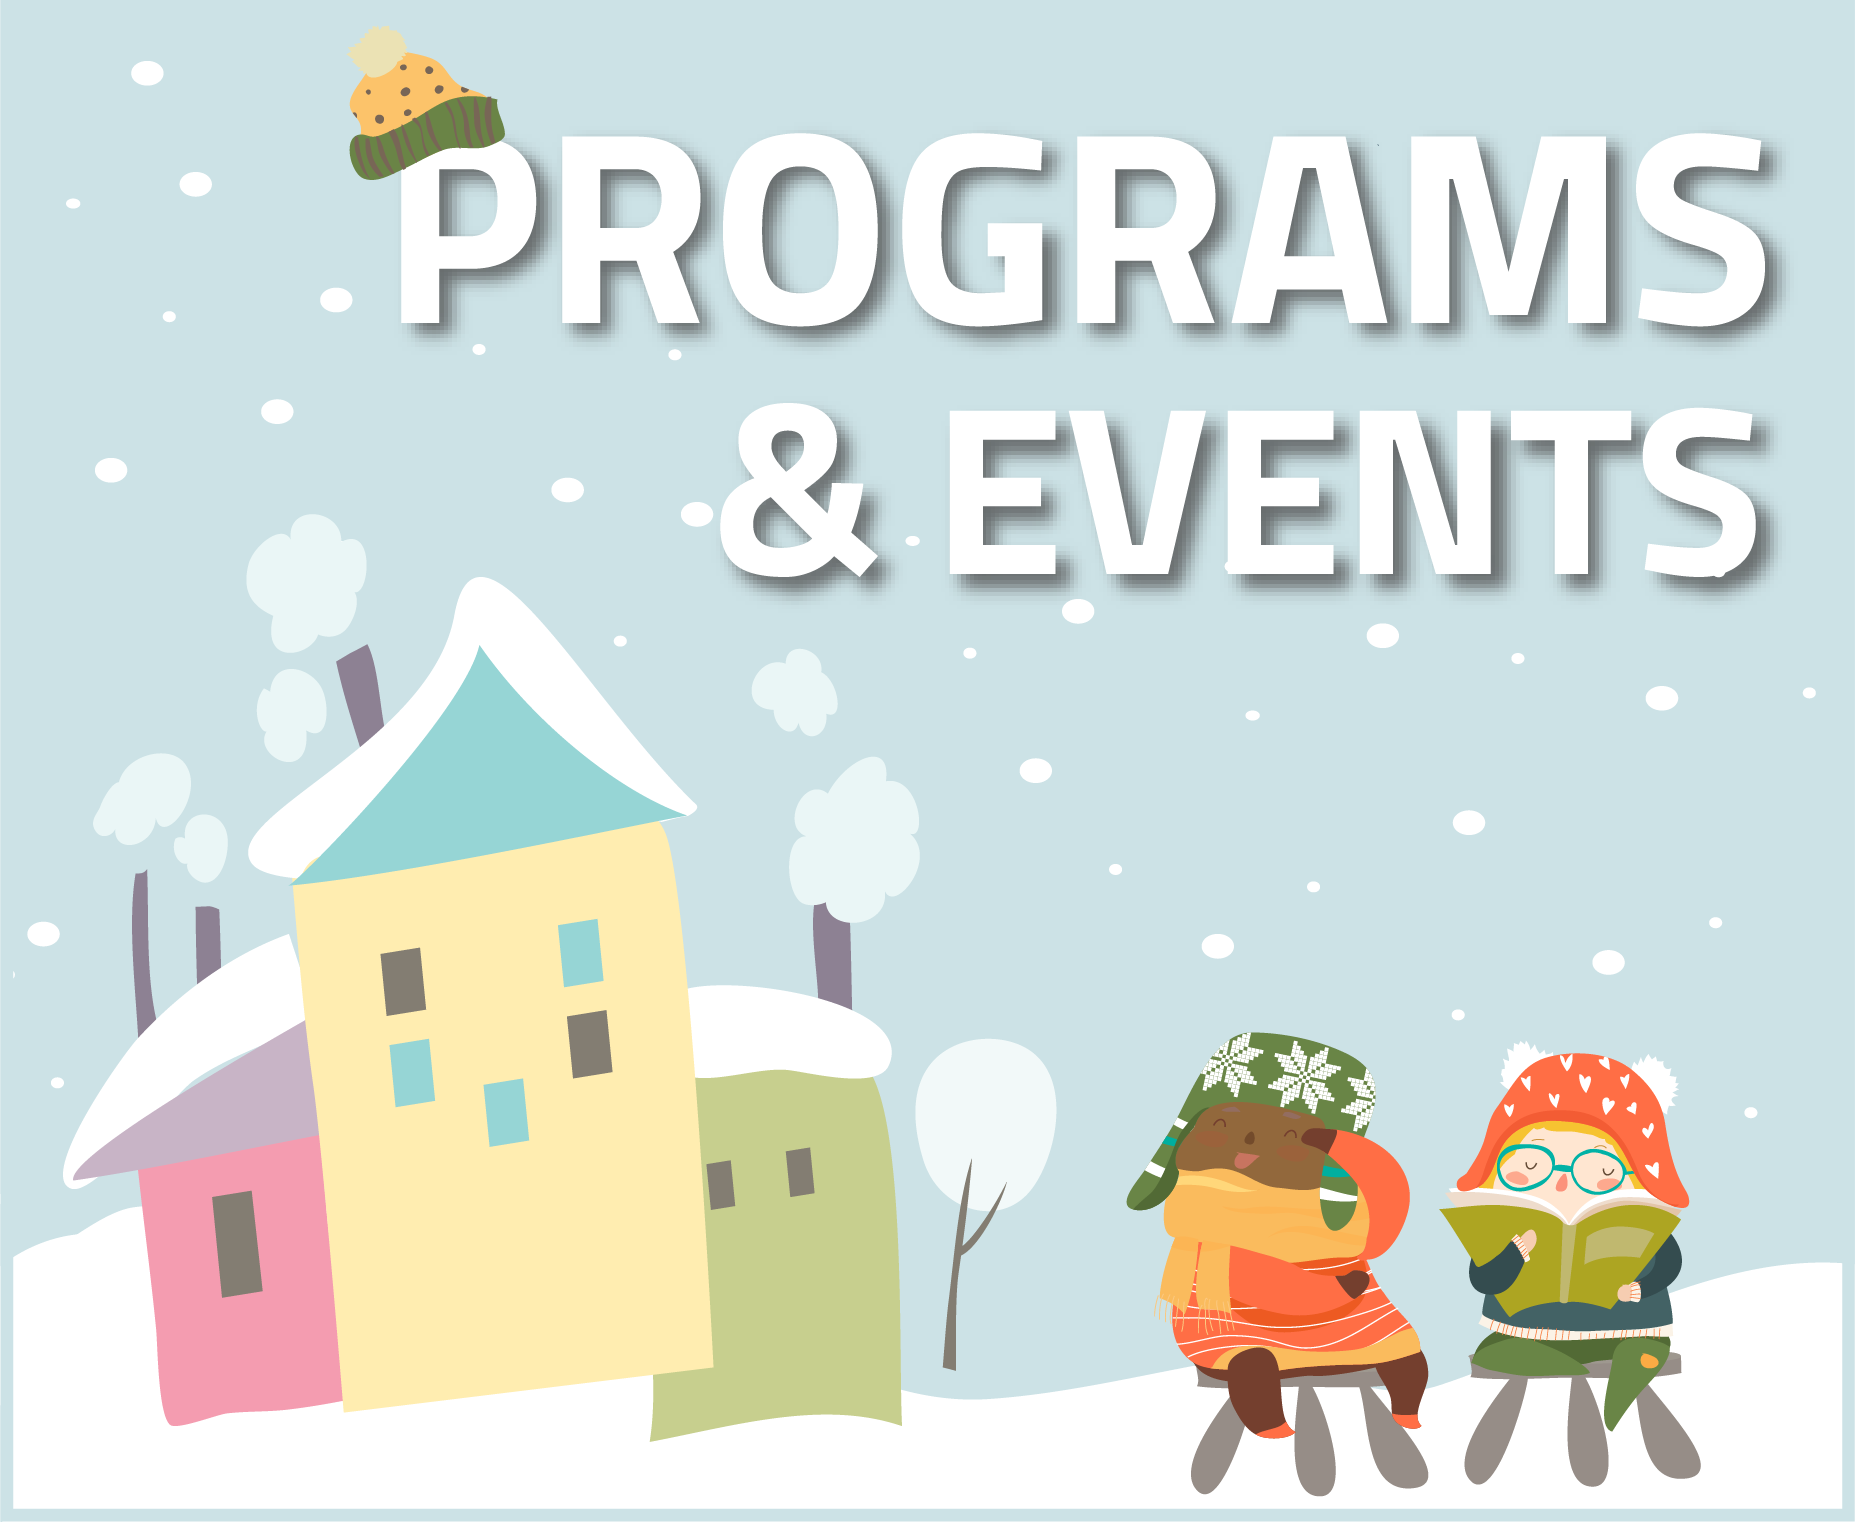 Cartoon with children in the snow and text, "programs & events".